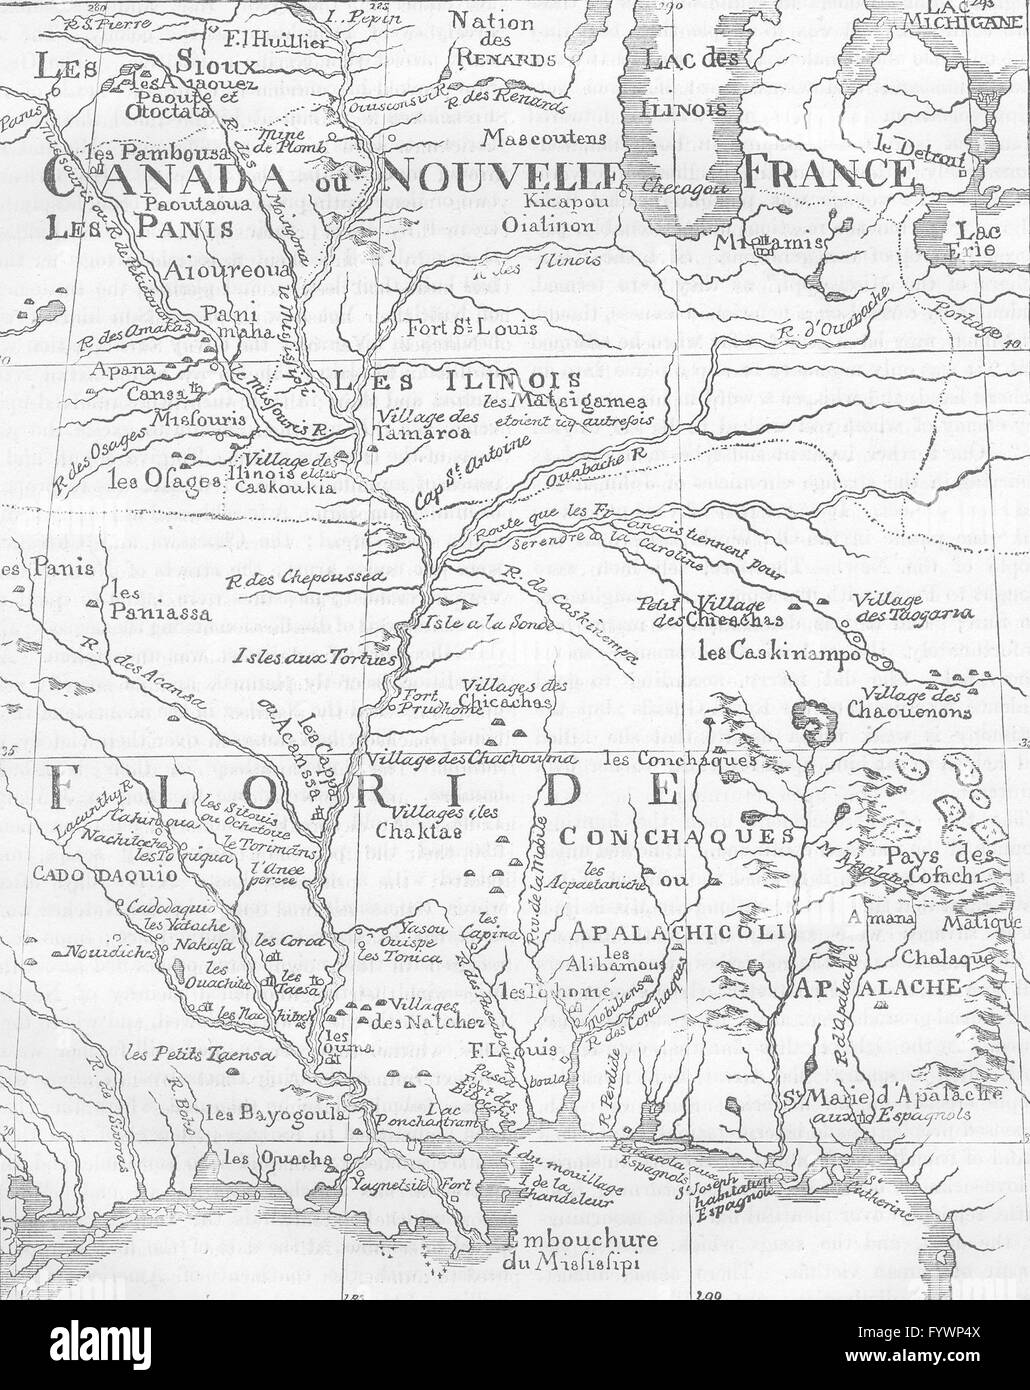 MISSISSIPPI: Course of, c1880 antique map Stock Photo